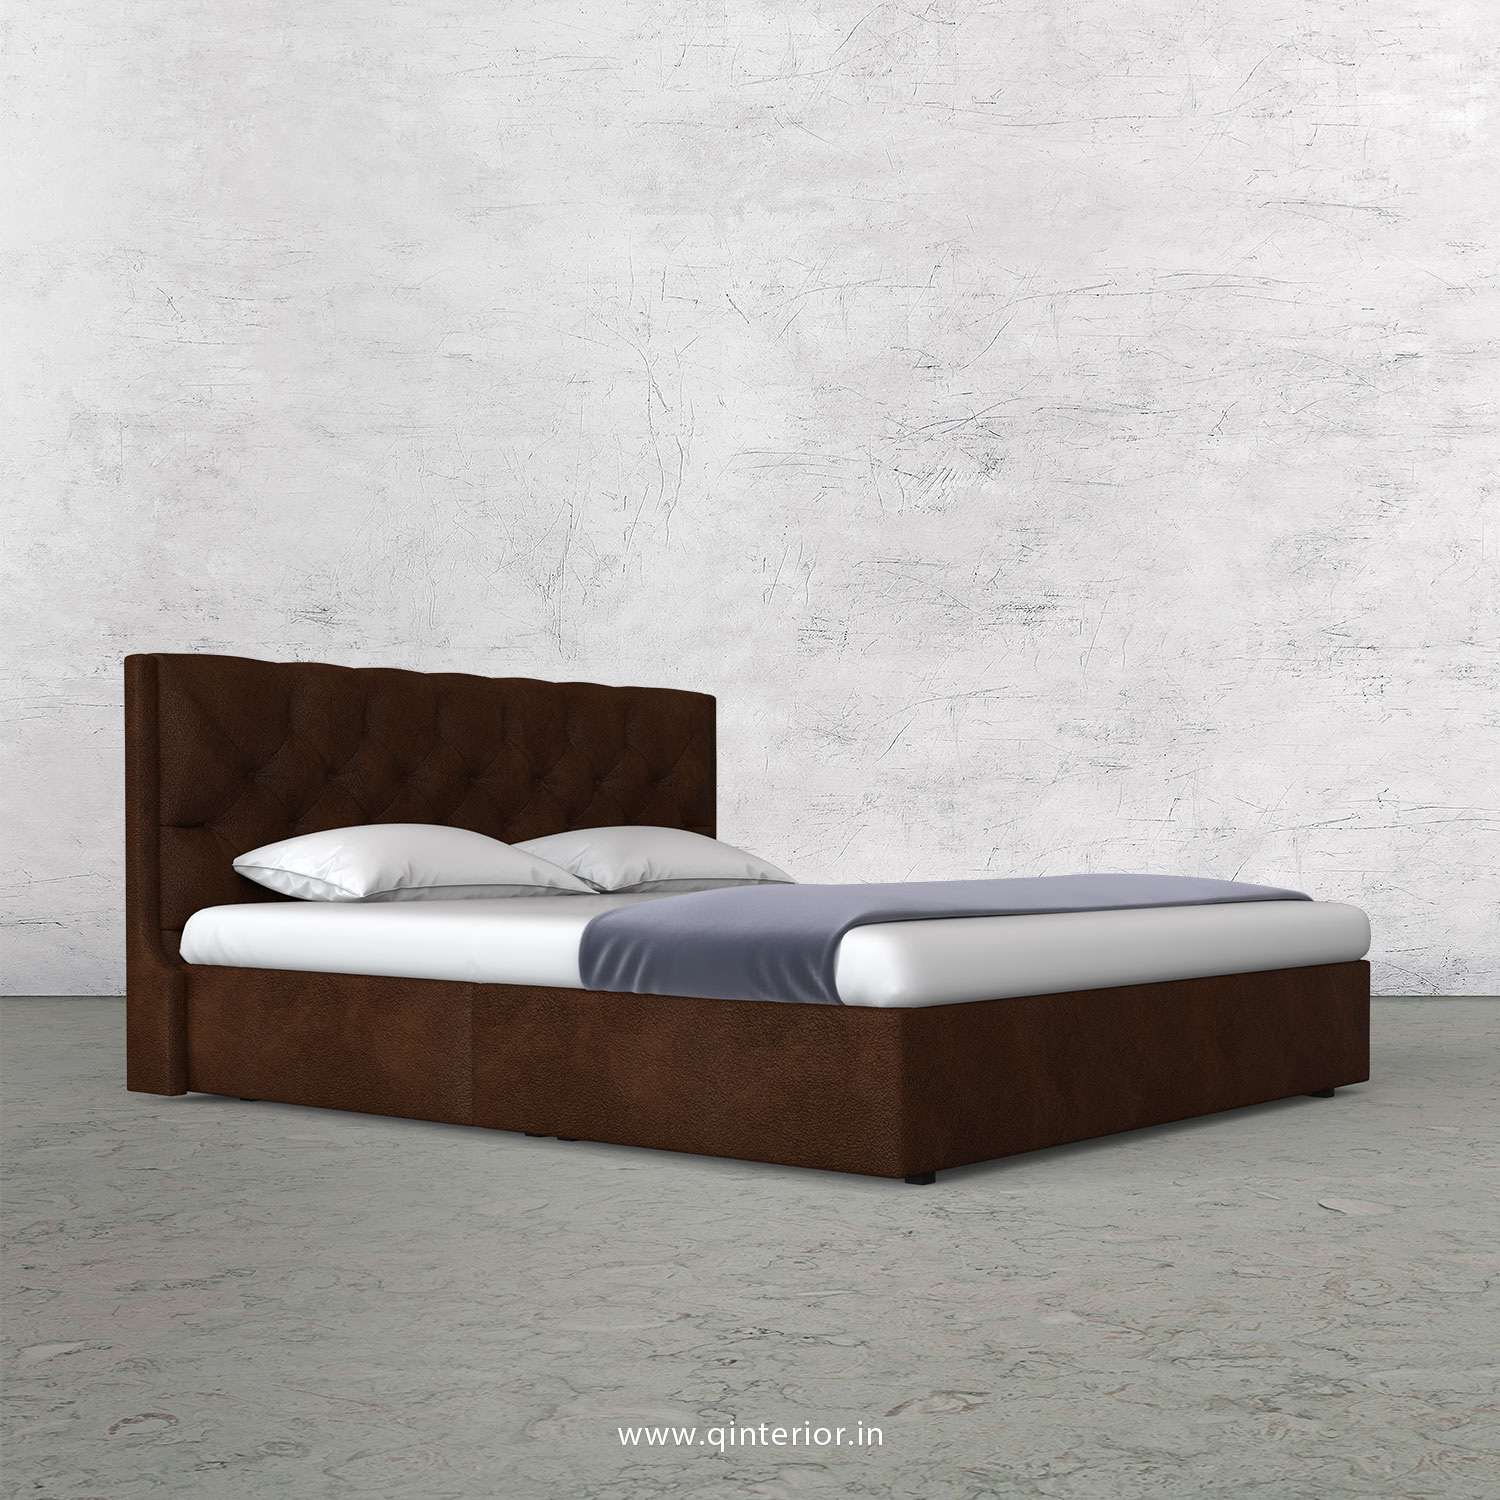 Scorpius King Size Bed in Fab Leather Fabric - KBD009 FL09